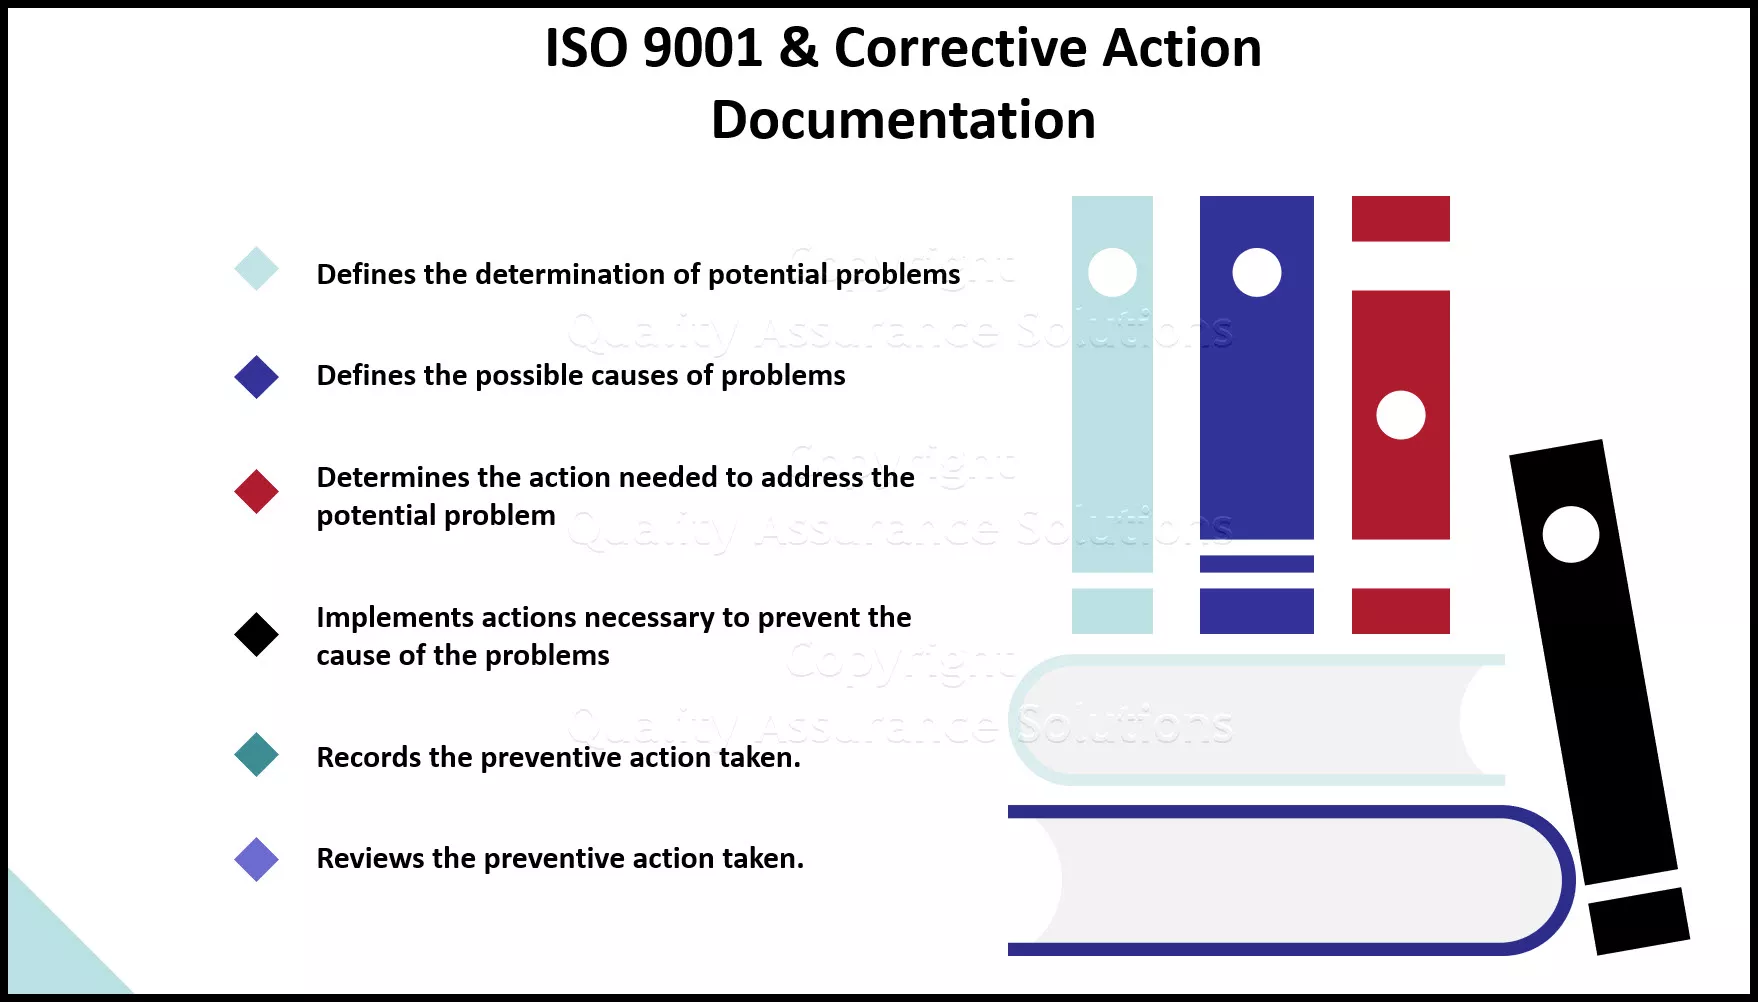 We break down the differences between corrective and preventive action management systems and preventive maintenance for ISO 9001